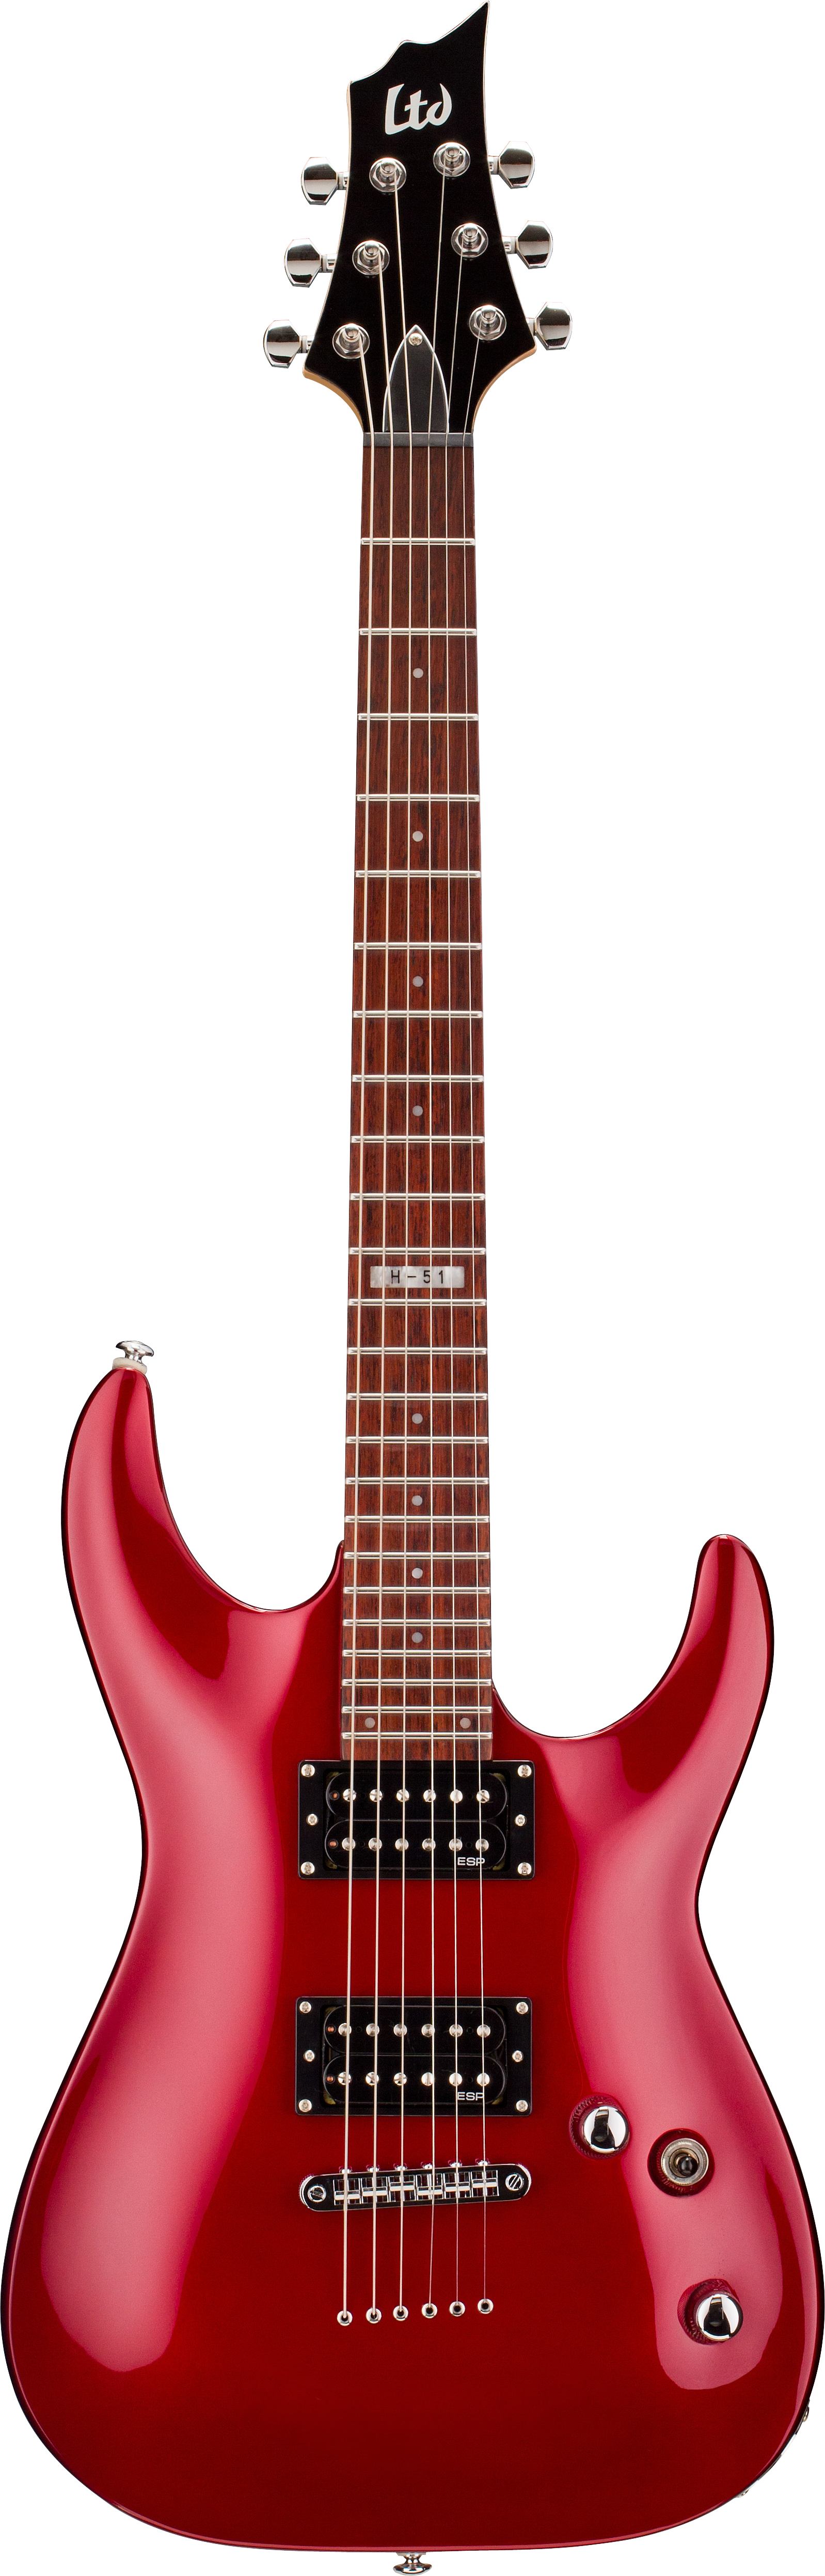 Red Electric Guitar Background PNG